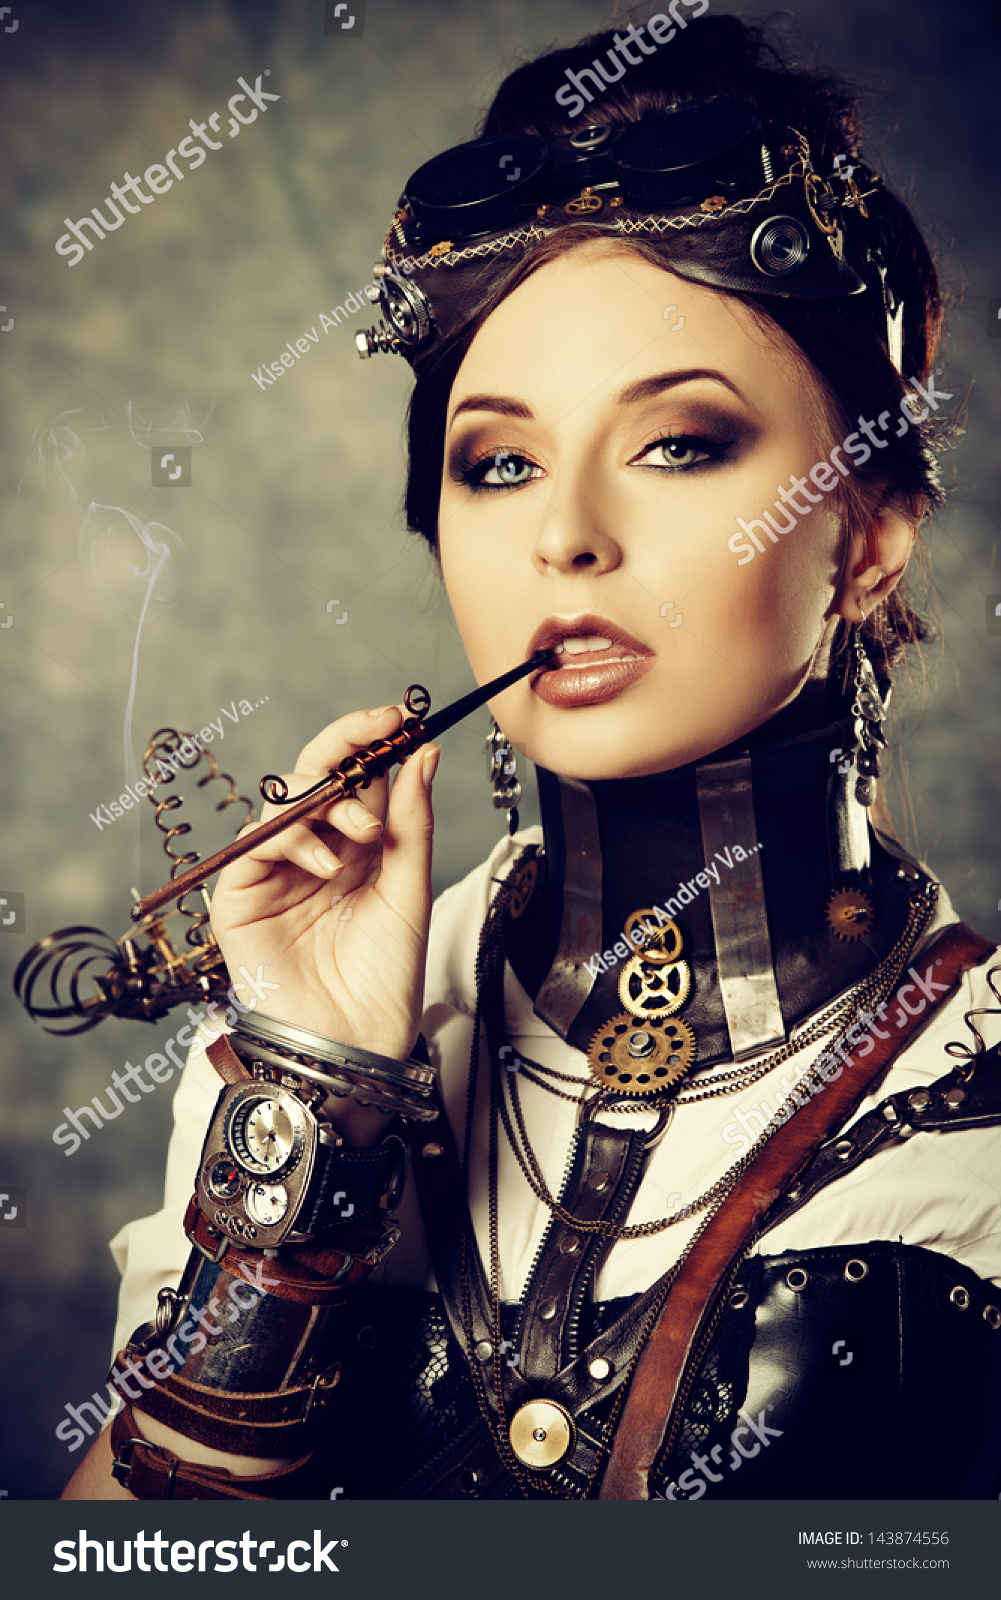 Portrait Of A Beautiful Steampunk Woman Over Grunge Background Stock Photo Shutterstock